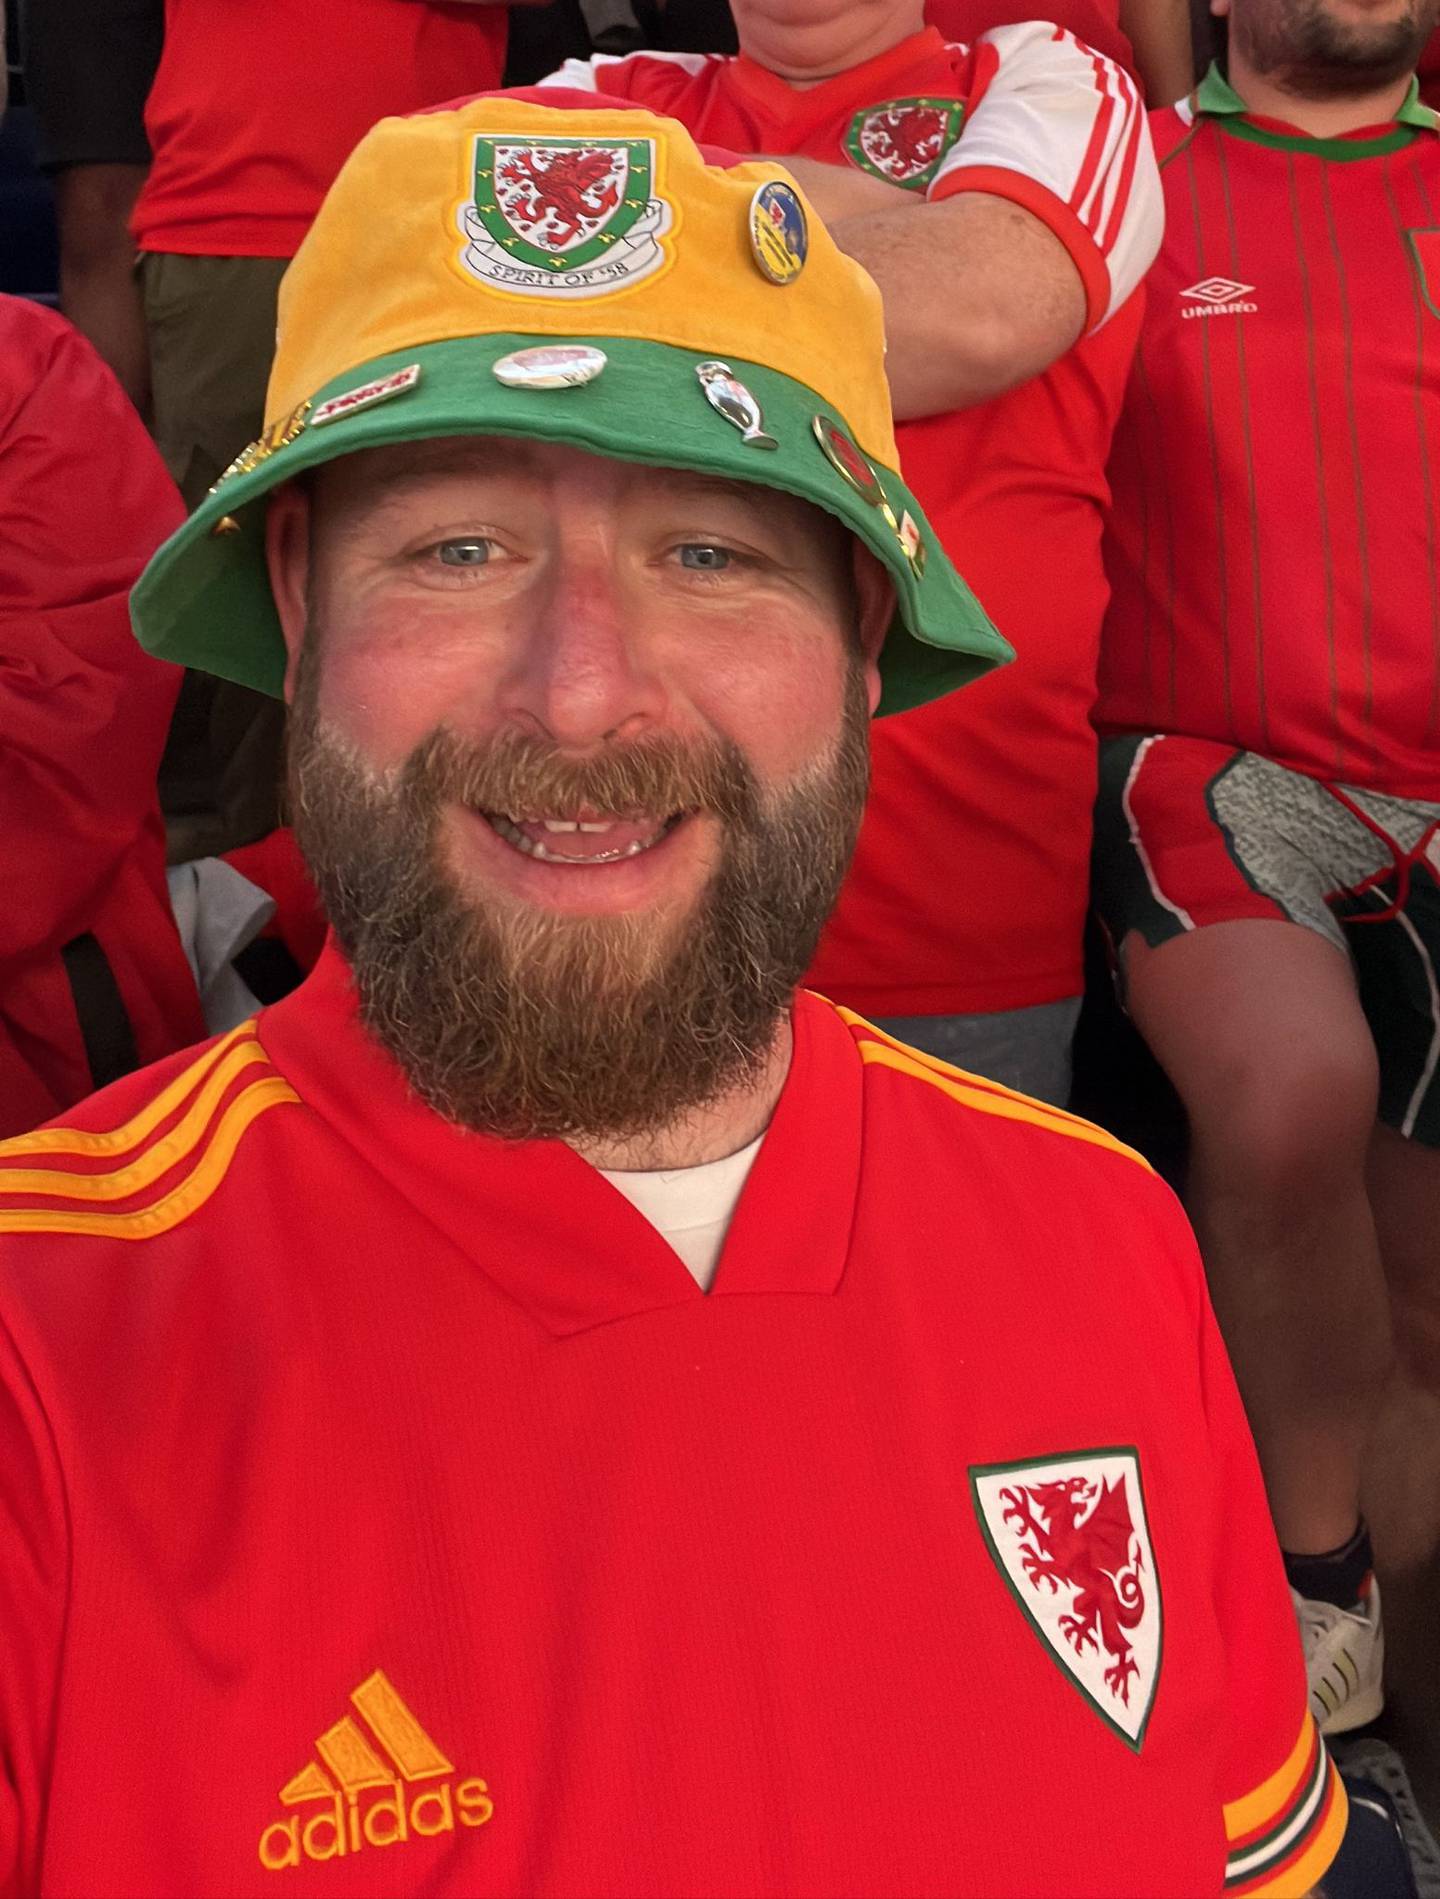 Wales fan Dai Rees will be travelling to Qatar from the Netherlands, where he lives, to watch the Dragons play in a World Cup for the first time in 64 years. Photo: Dai Rees